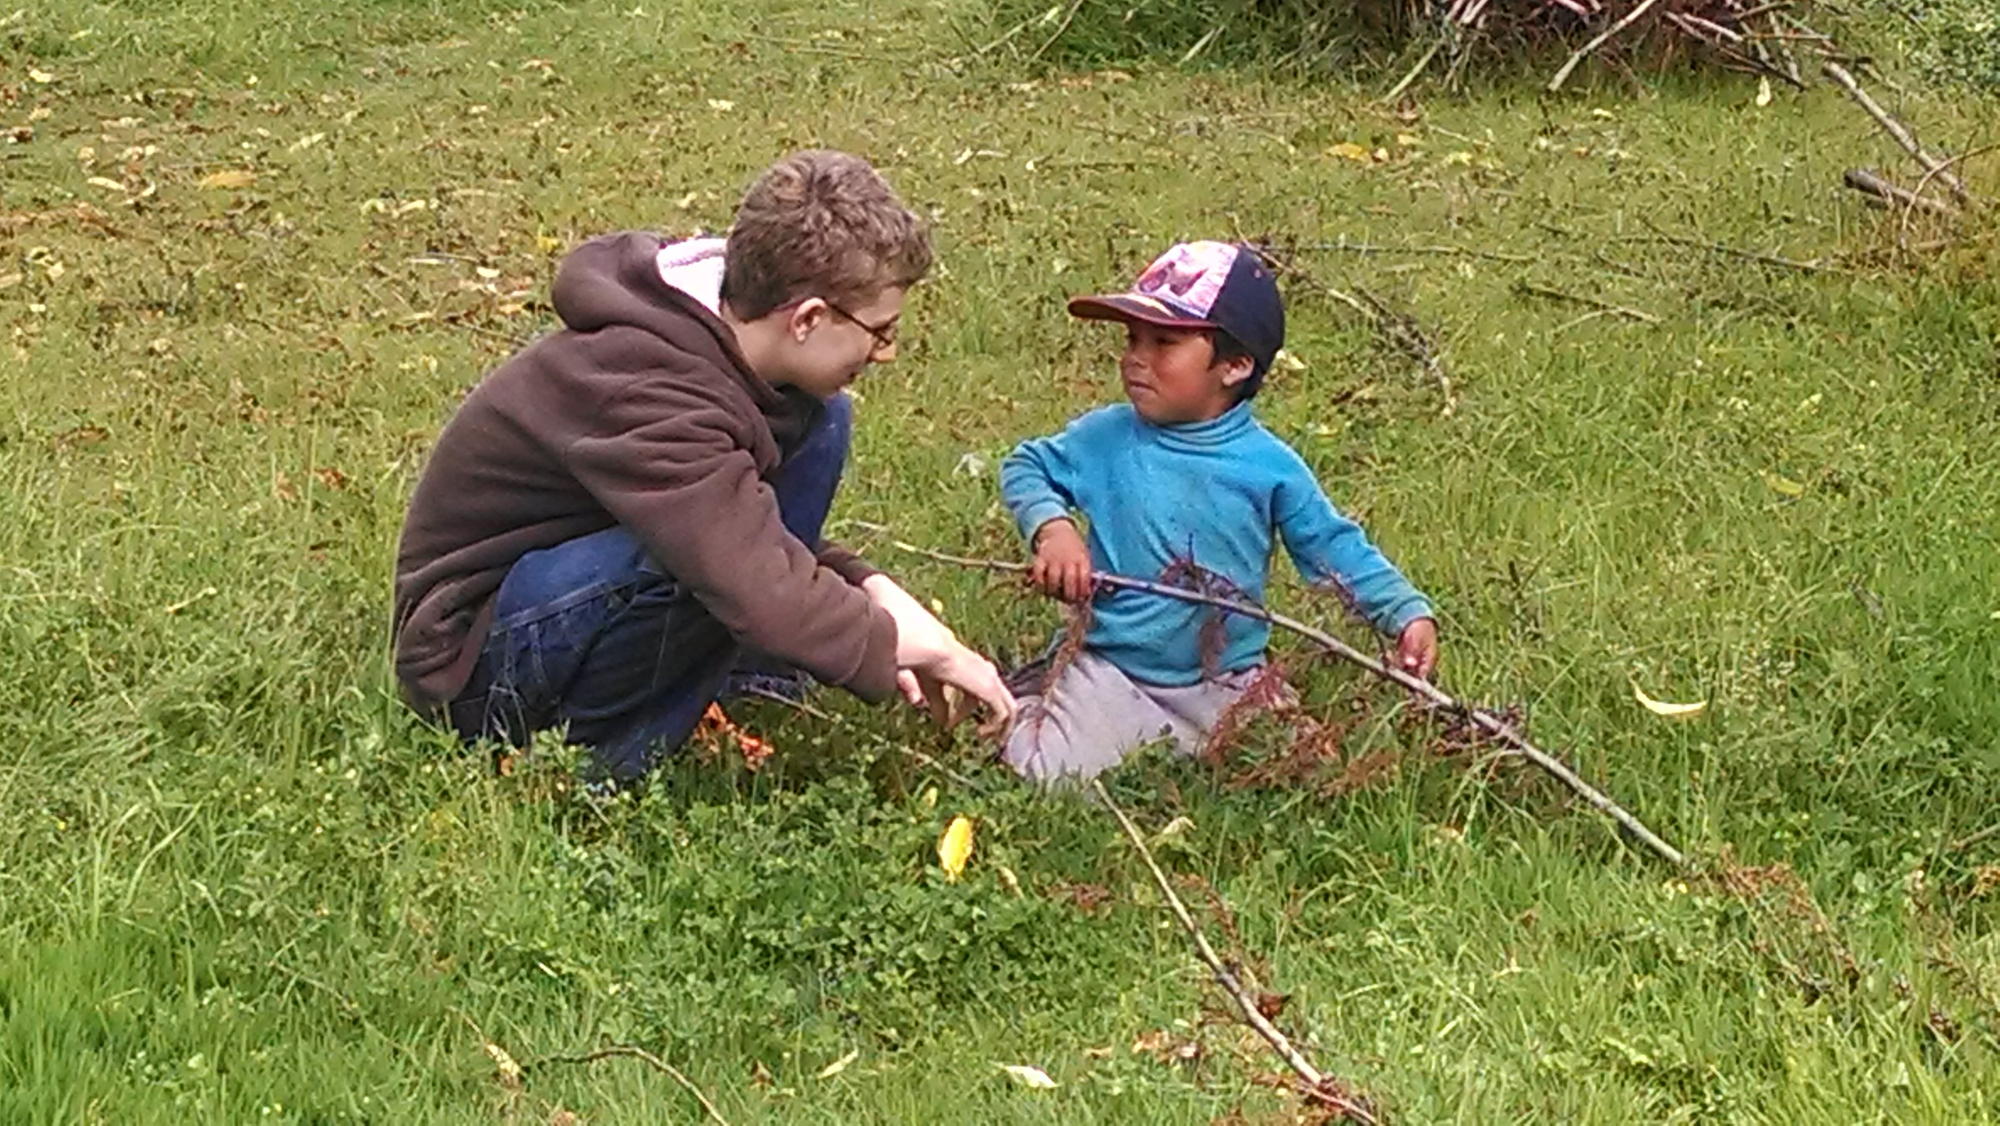 Two young boys talk in a field